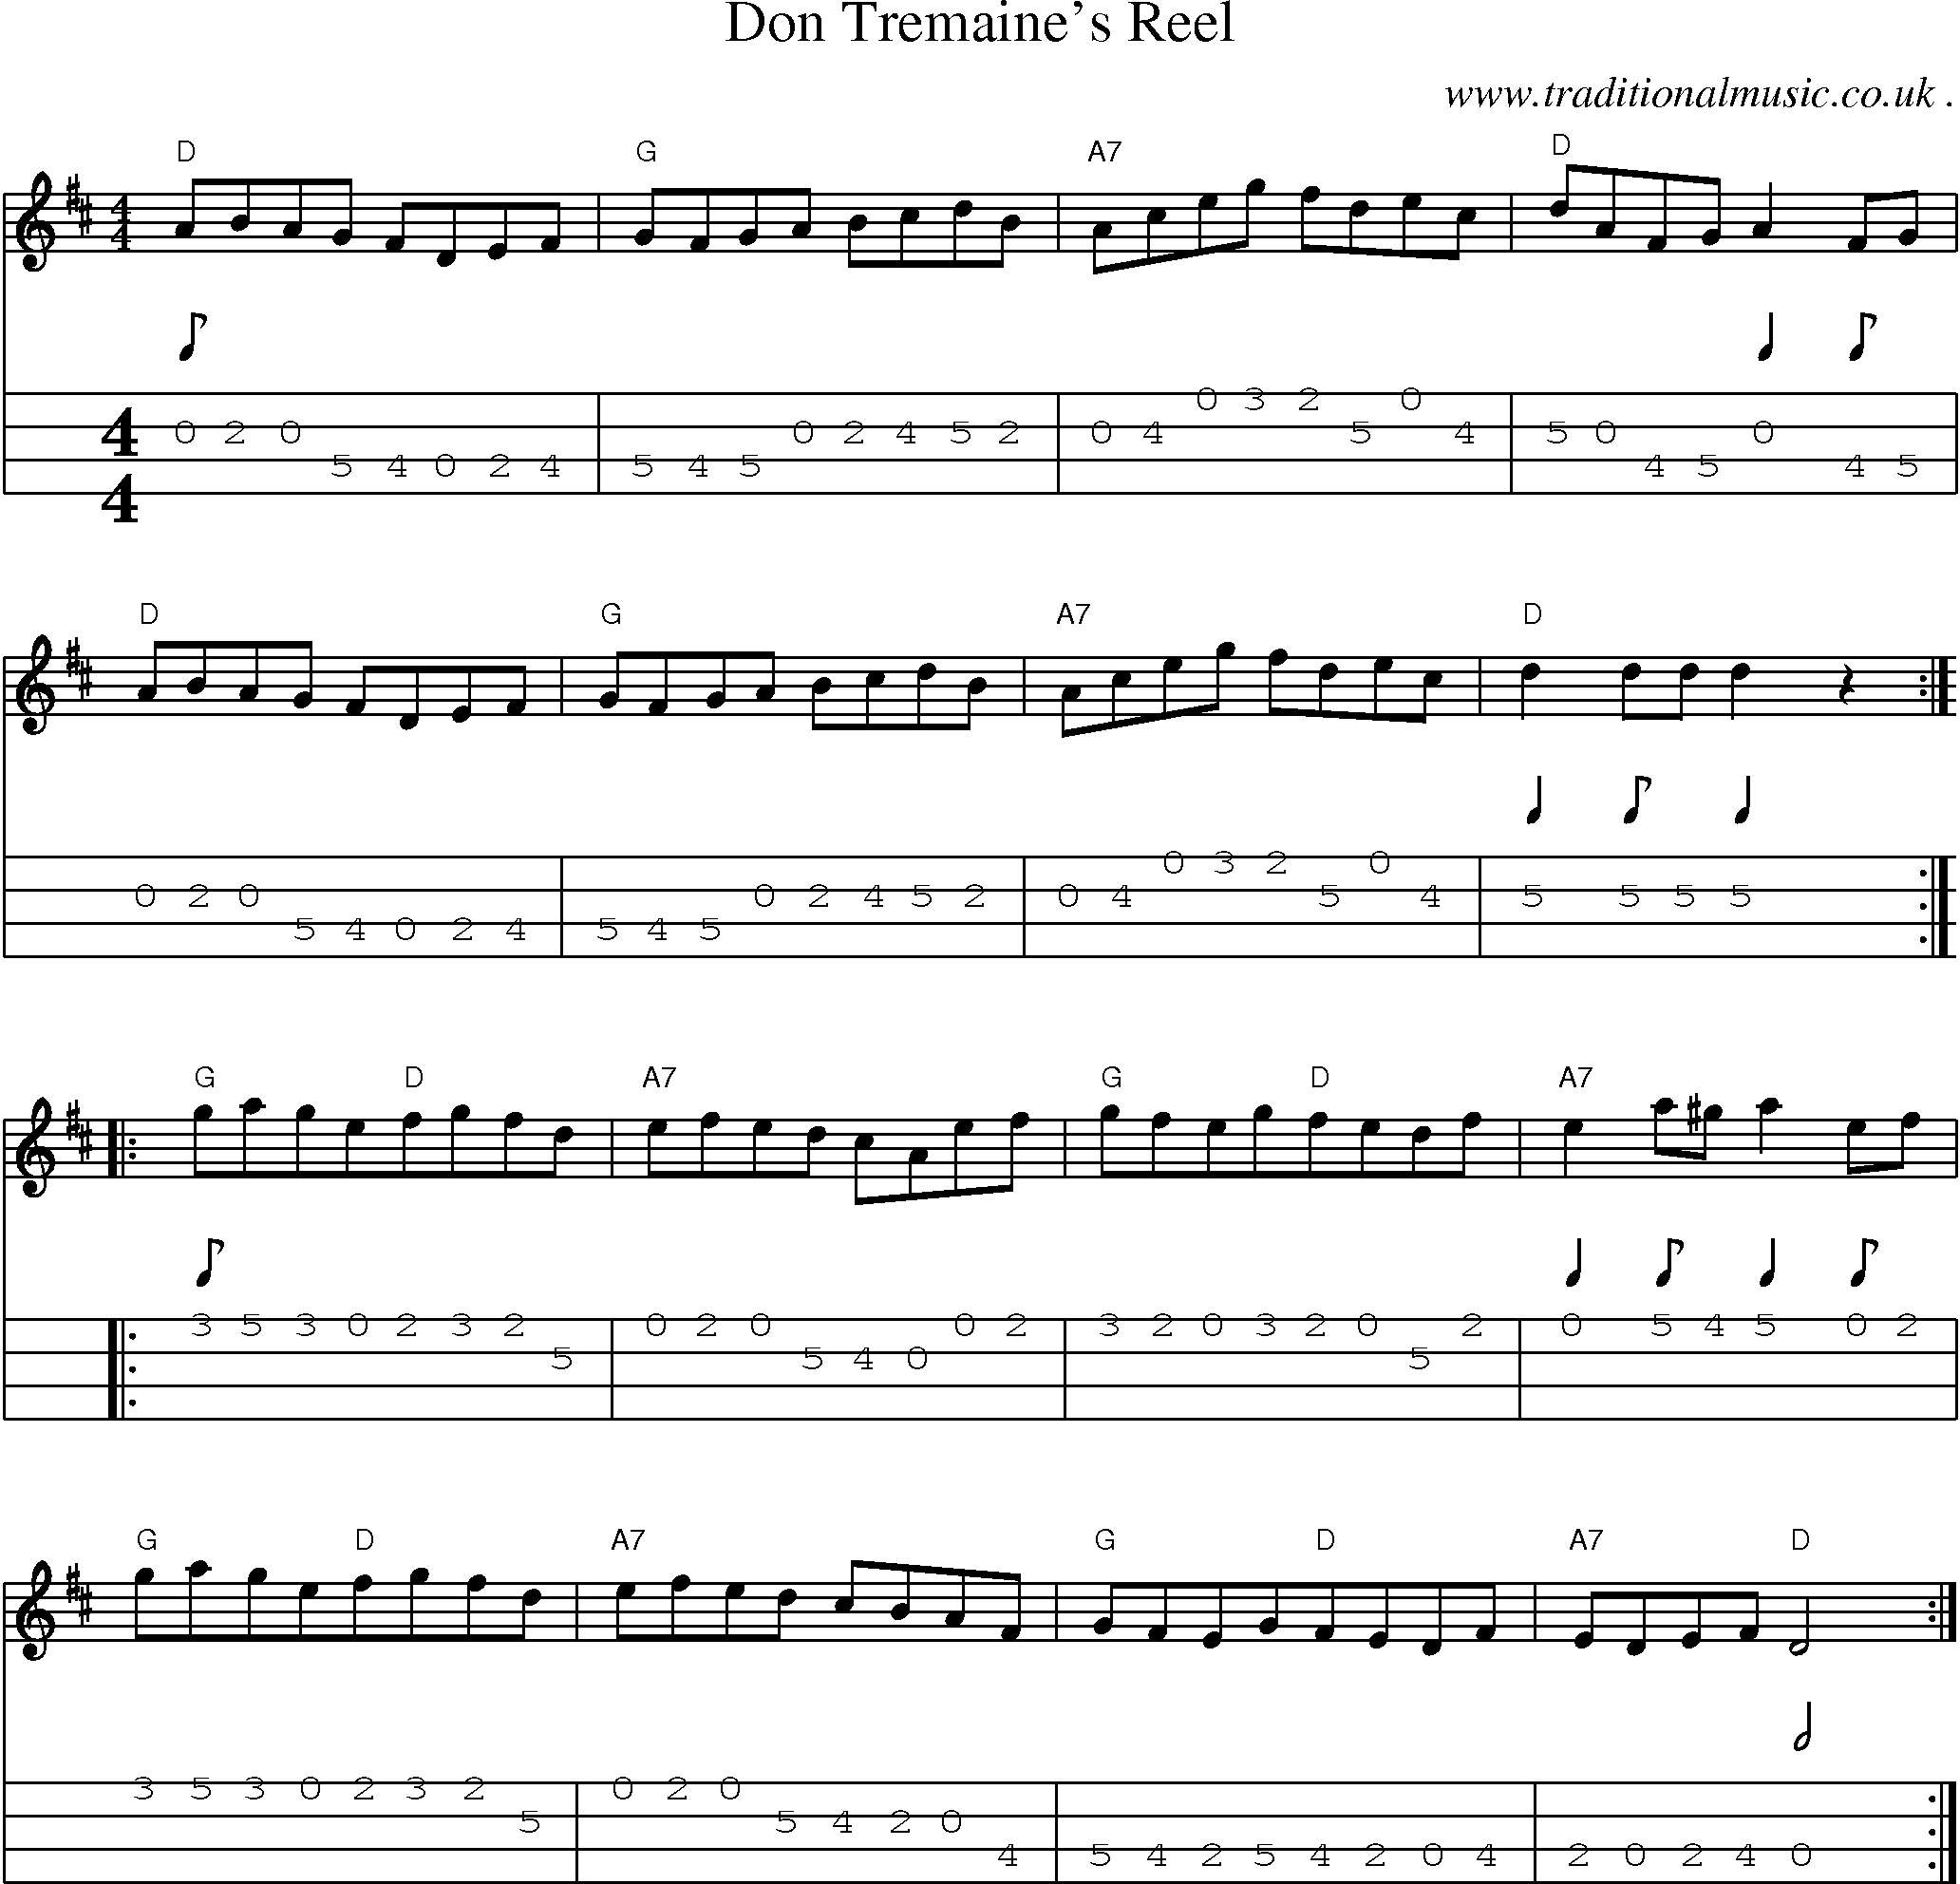 Sheet-Music and Mandolin Tabs for Don Tremaines Reel